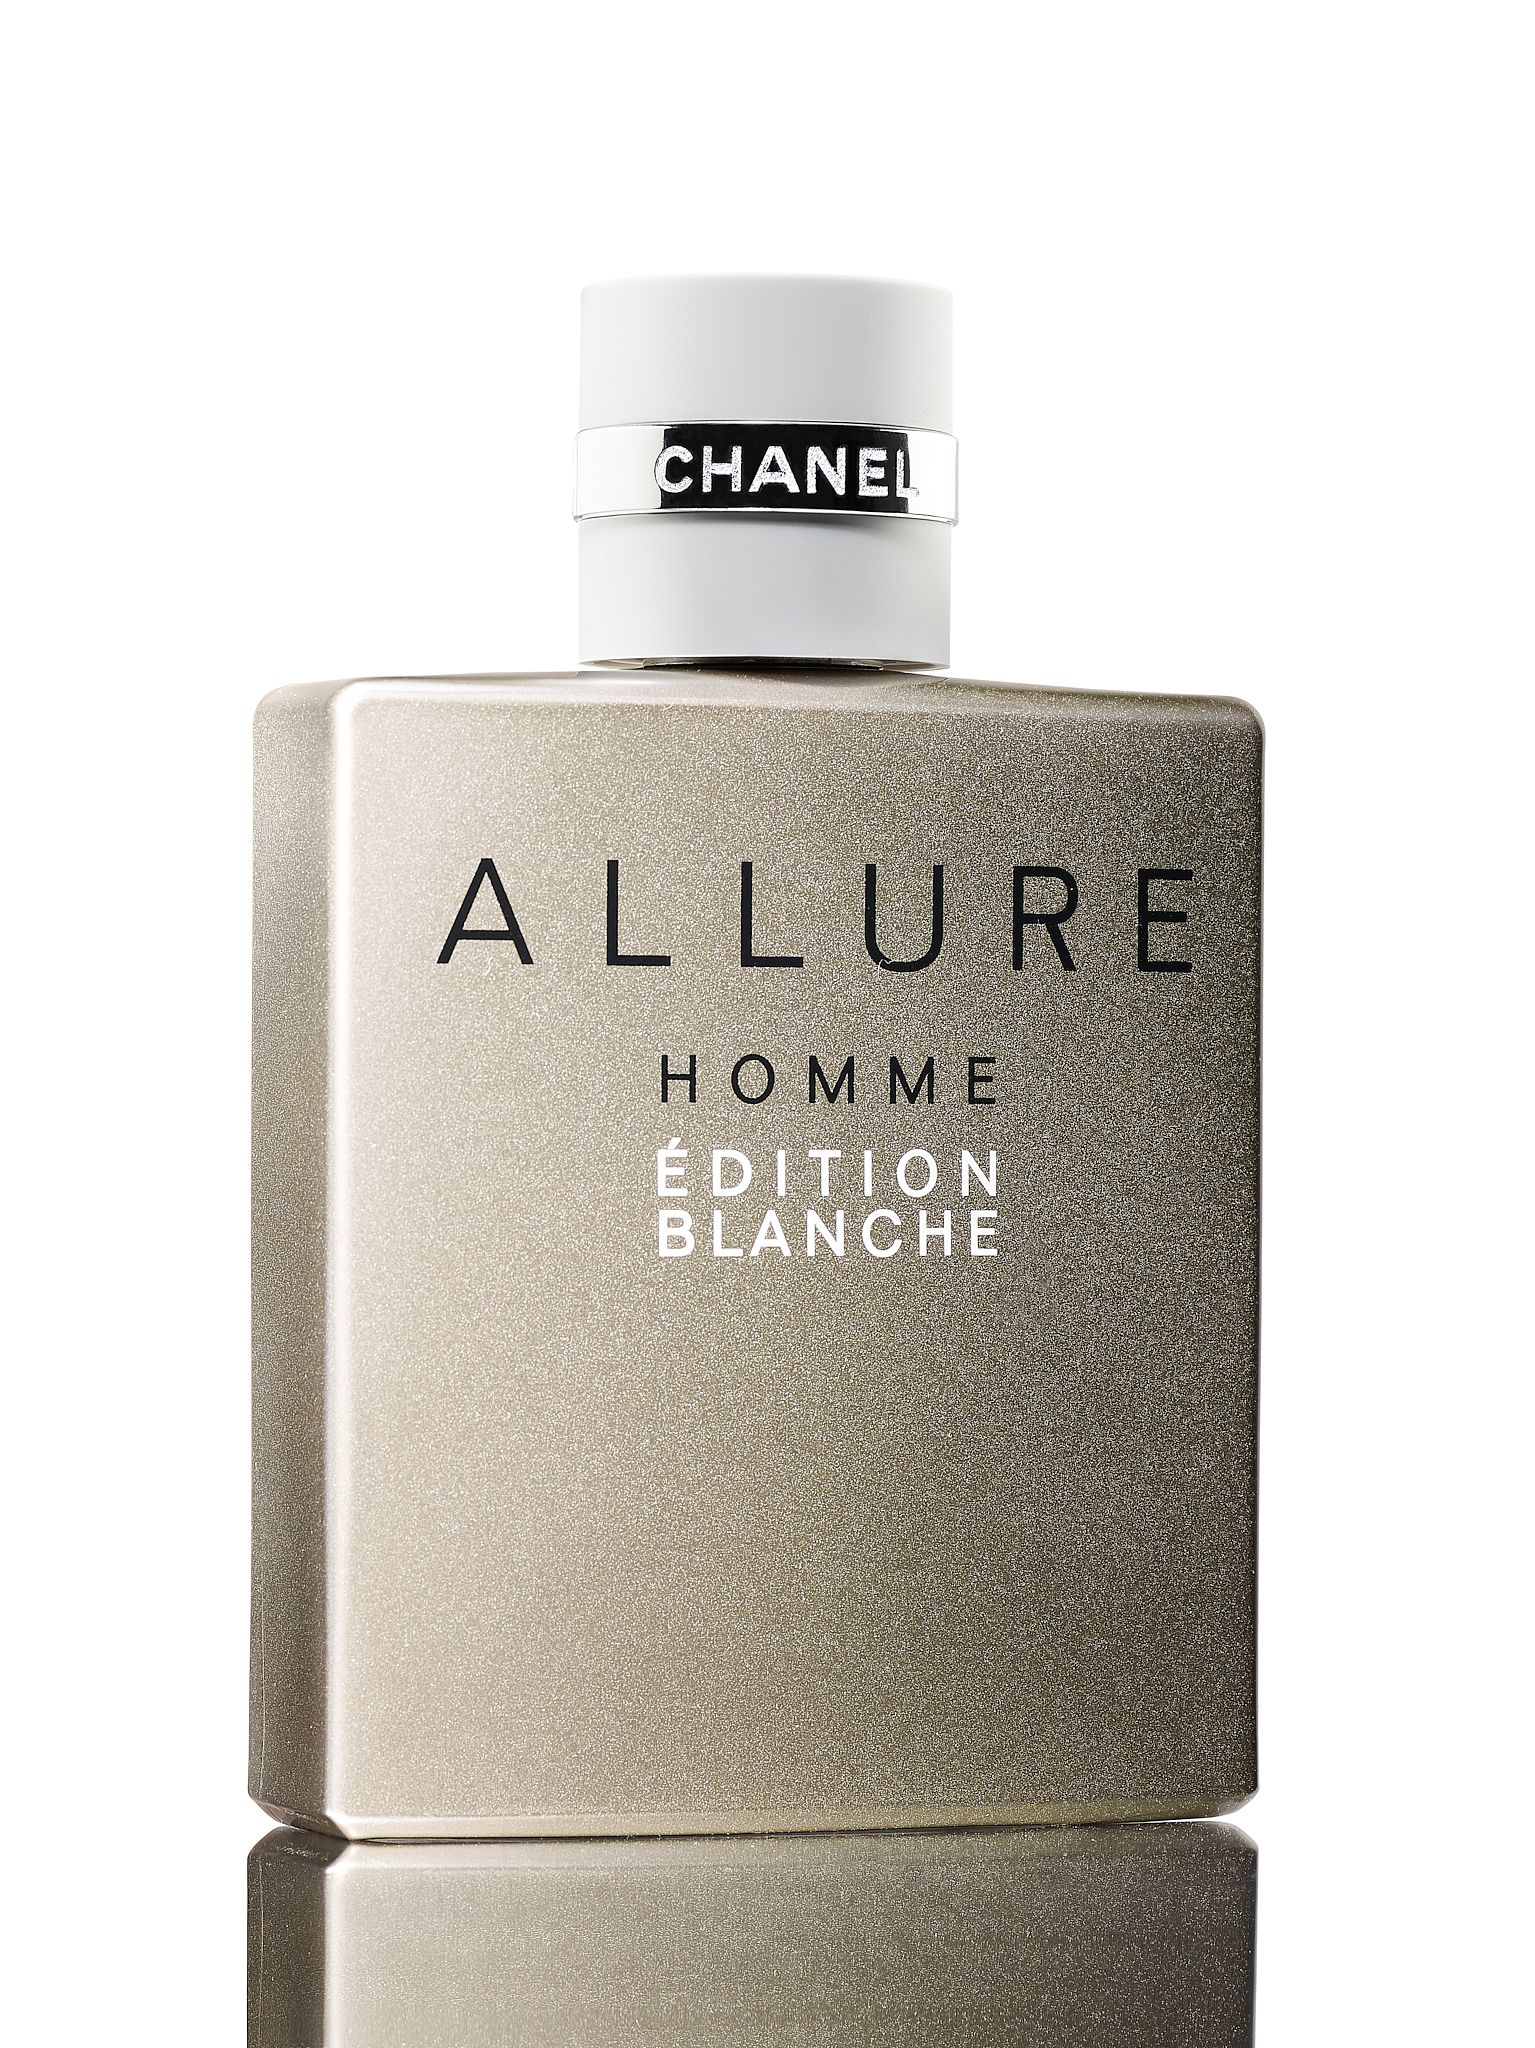 Chanel Allure Edition Blance - Pic. 1